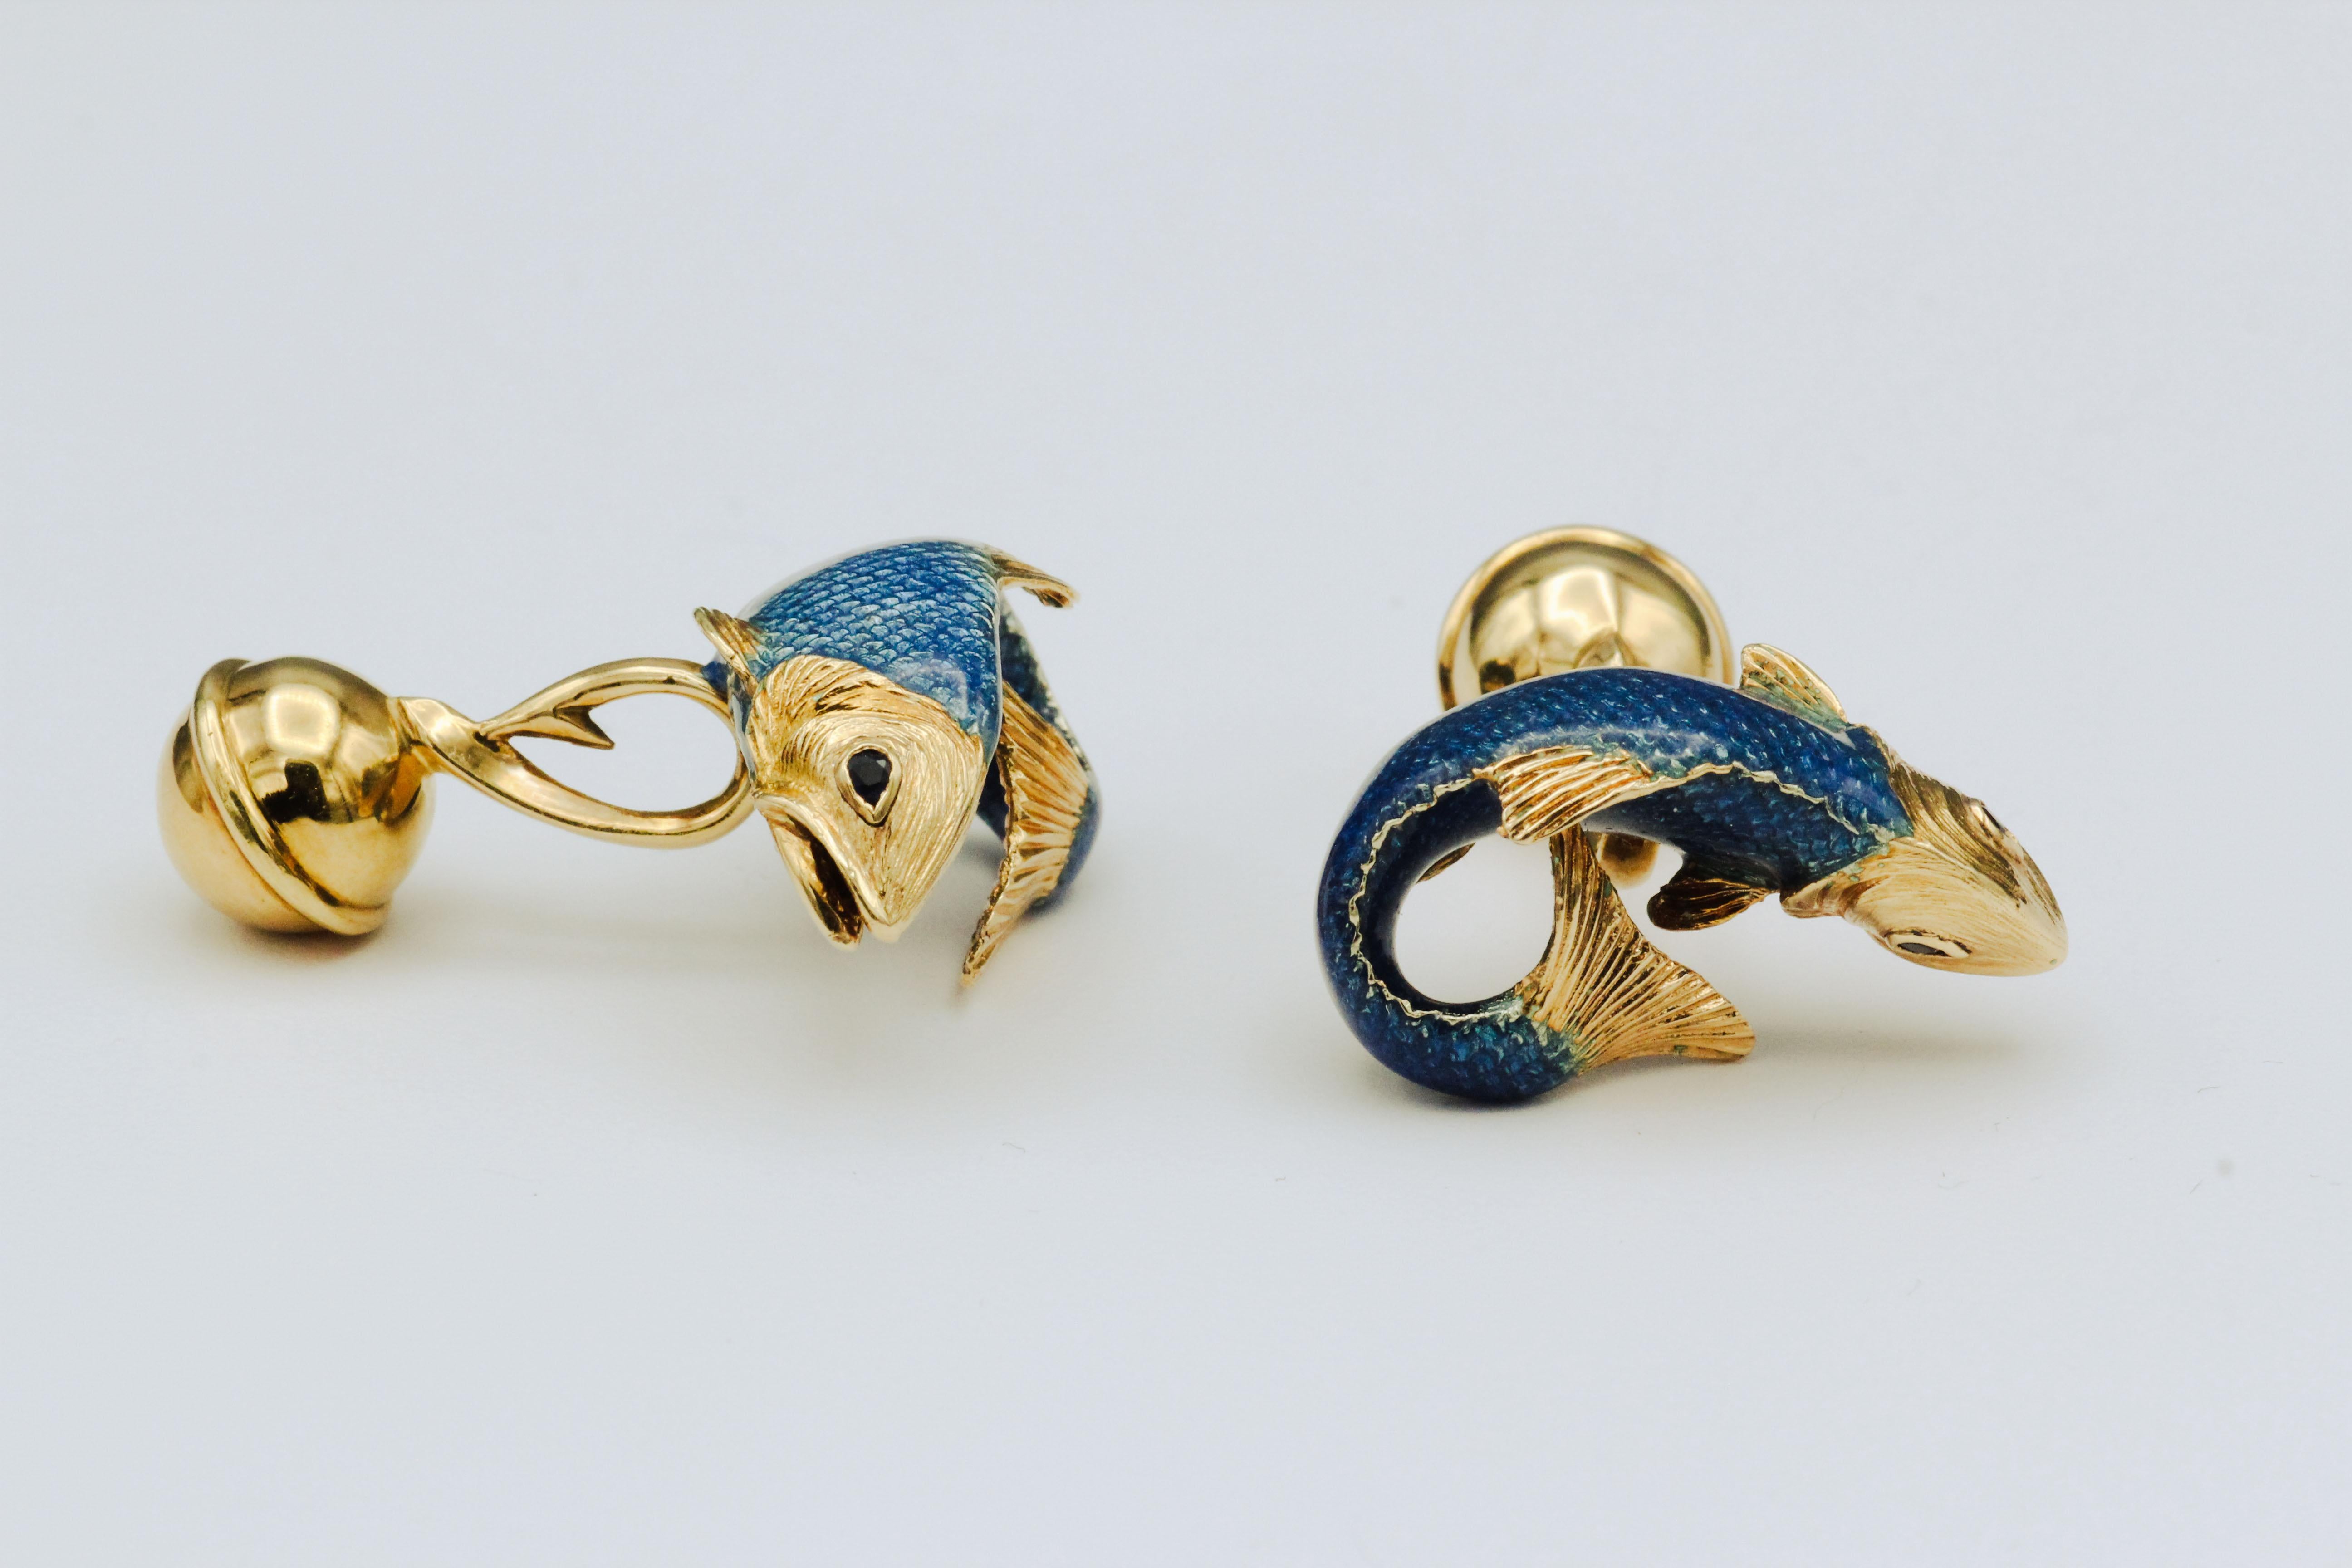 Fine pair of sapphire and 18K yellow gold Fish cufflinks by Tiffany & Co., circa 1980s. Designed as koi fish, they a further accented with sapphire as the eyes and a fine blue enamel coat.

Hallmarks: Tiffany & Co. 18k, 1989, Germany